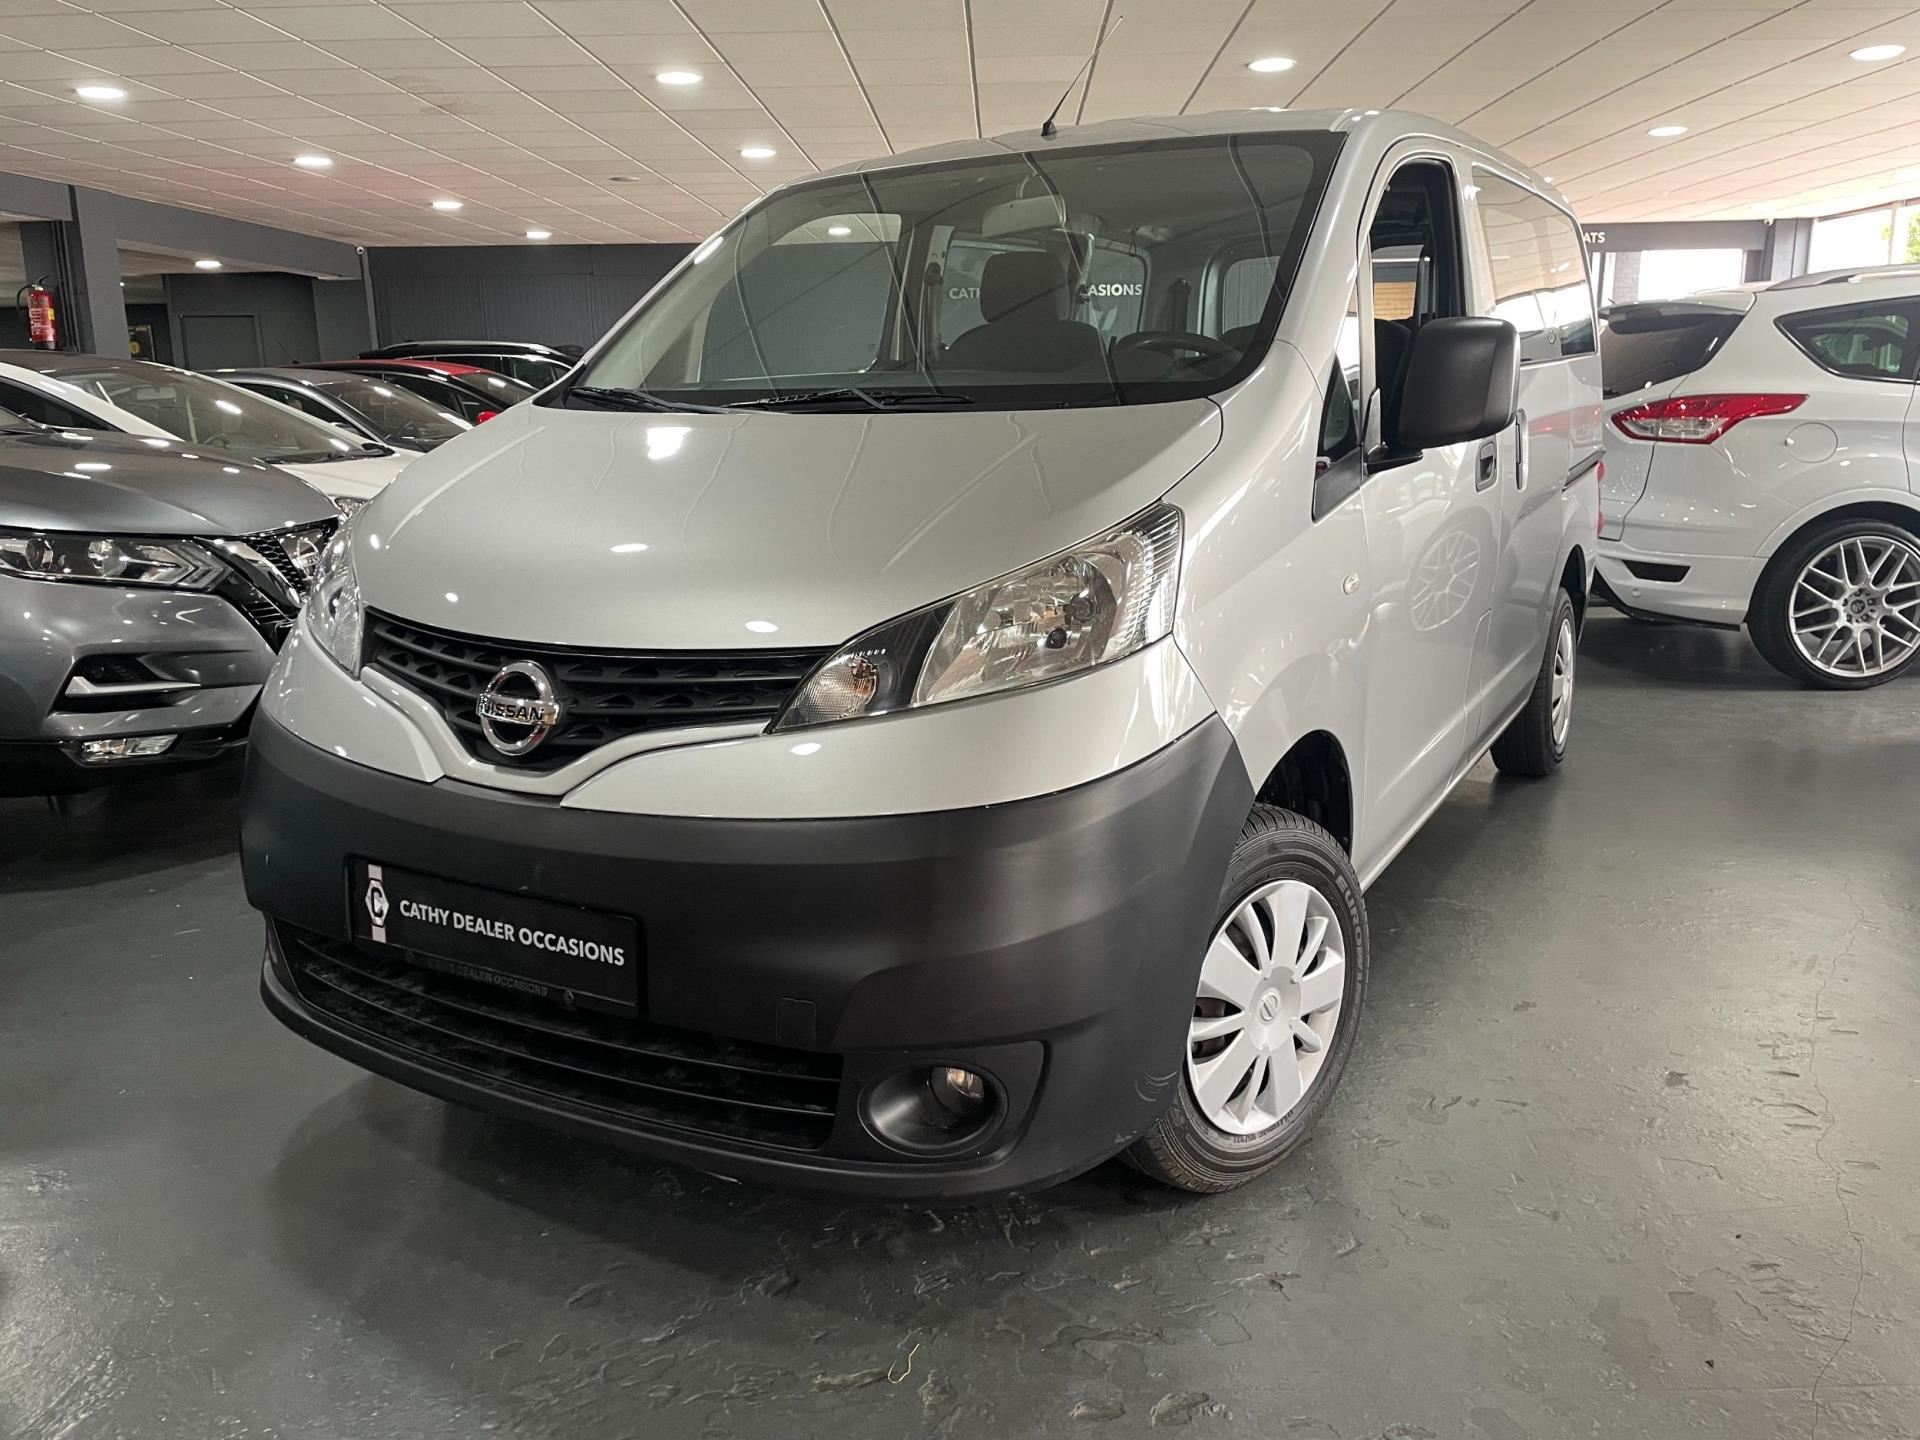 Nissan NV200 occasion - Cathy Dealer Occasions